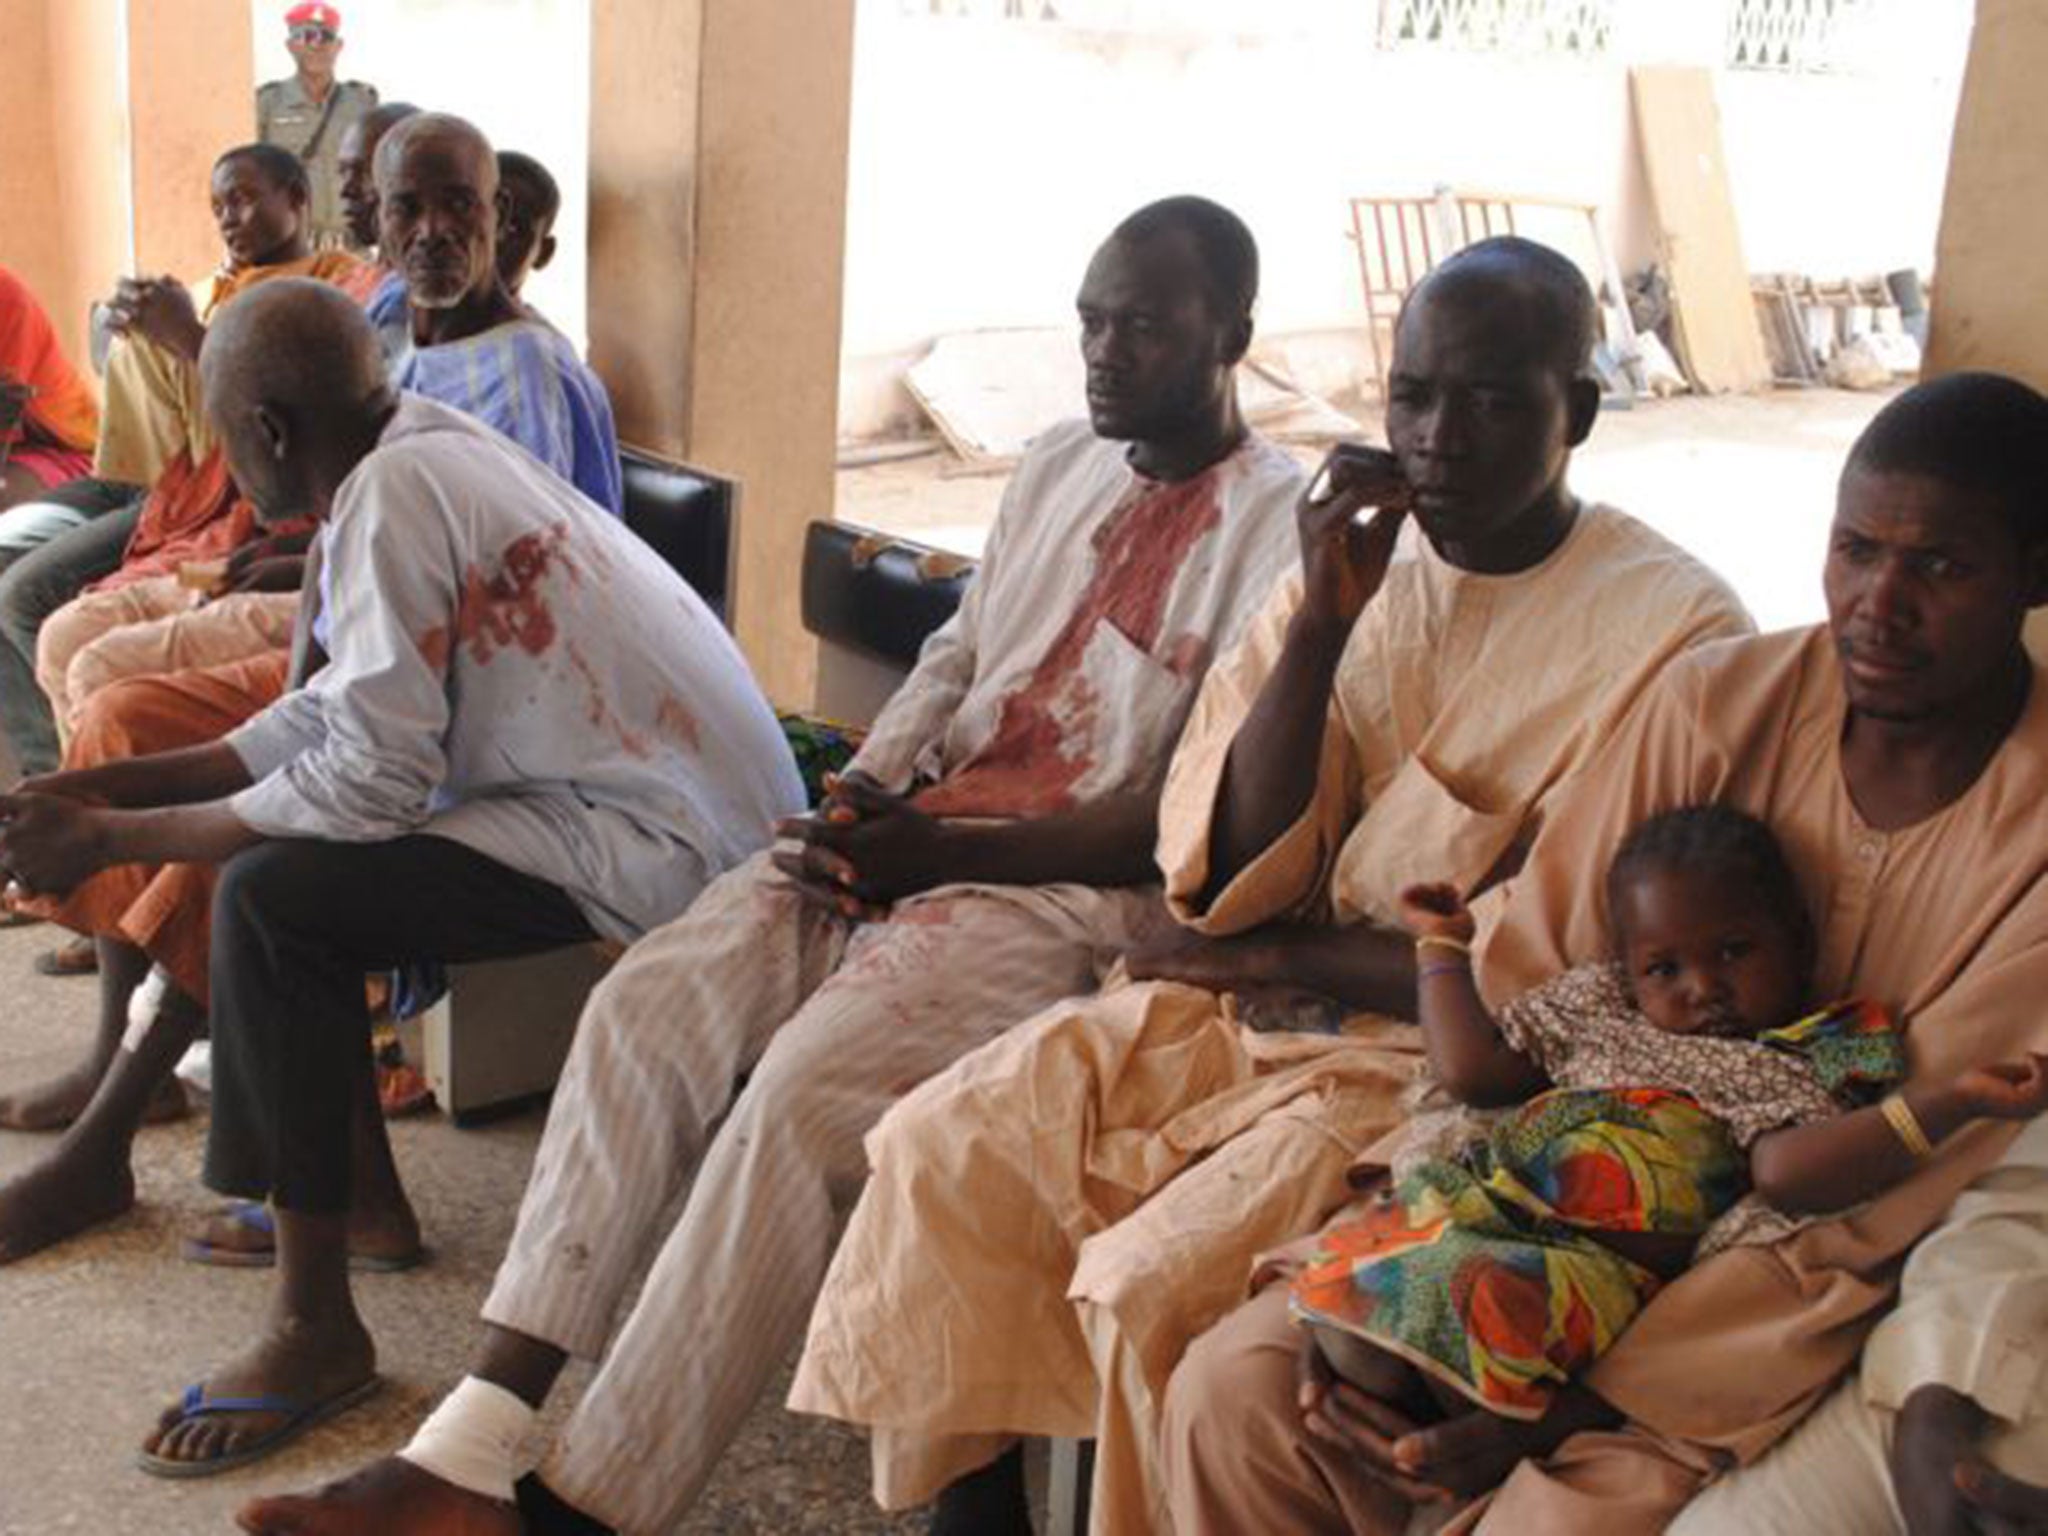 Victims of the Boko Haram attack wait for treatment at a hospital in Maiduguri